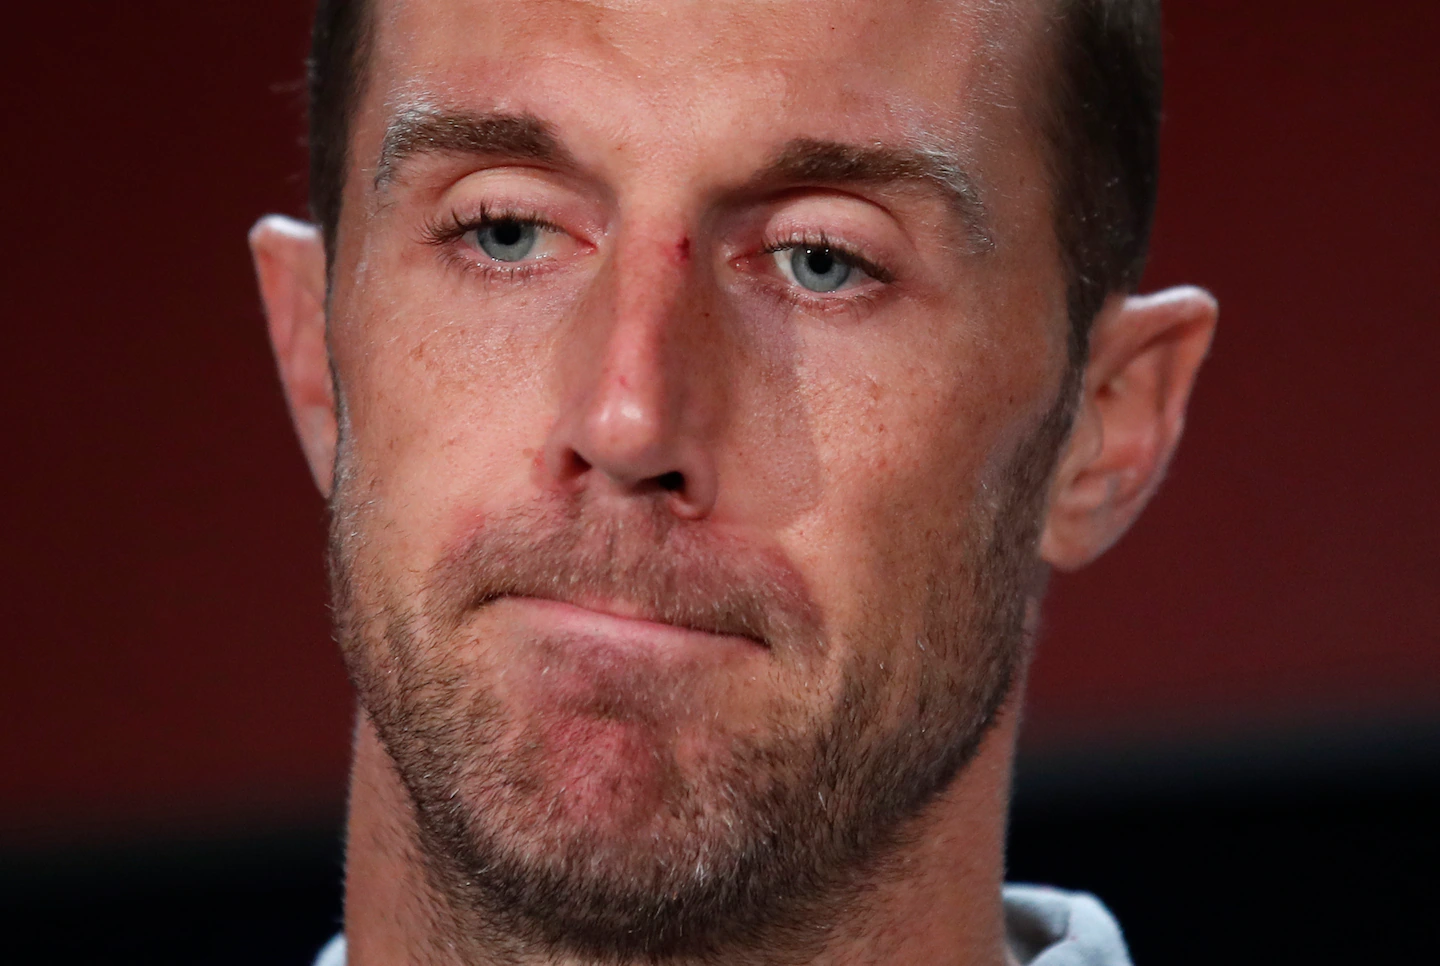 Alex Smith’s daughter, Sloan, recovers from a brain tumor